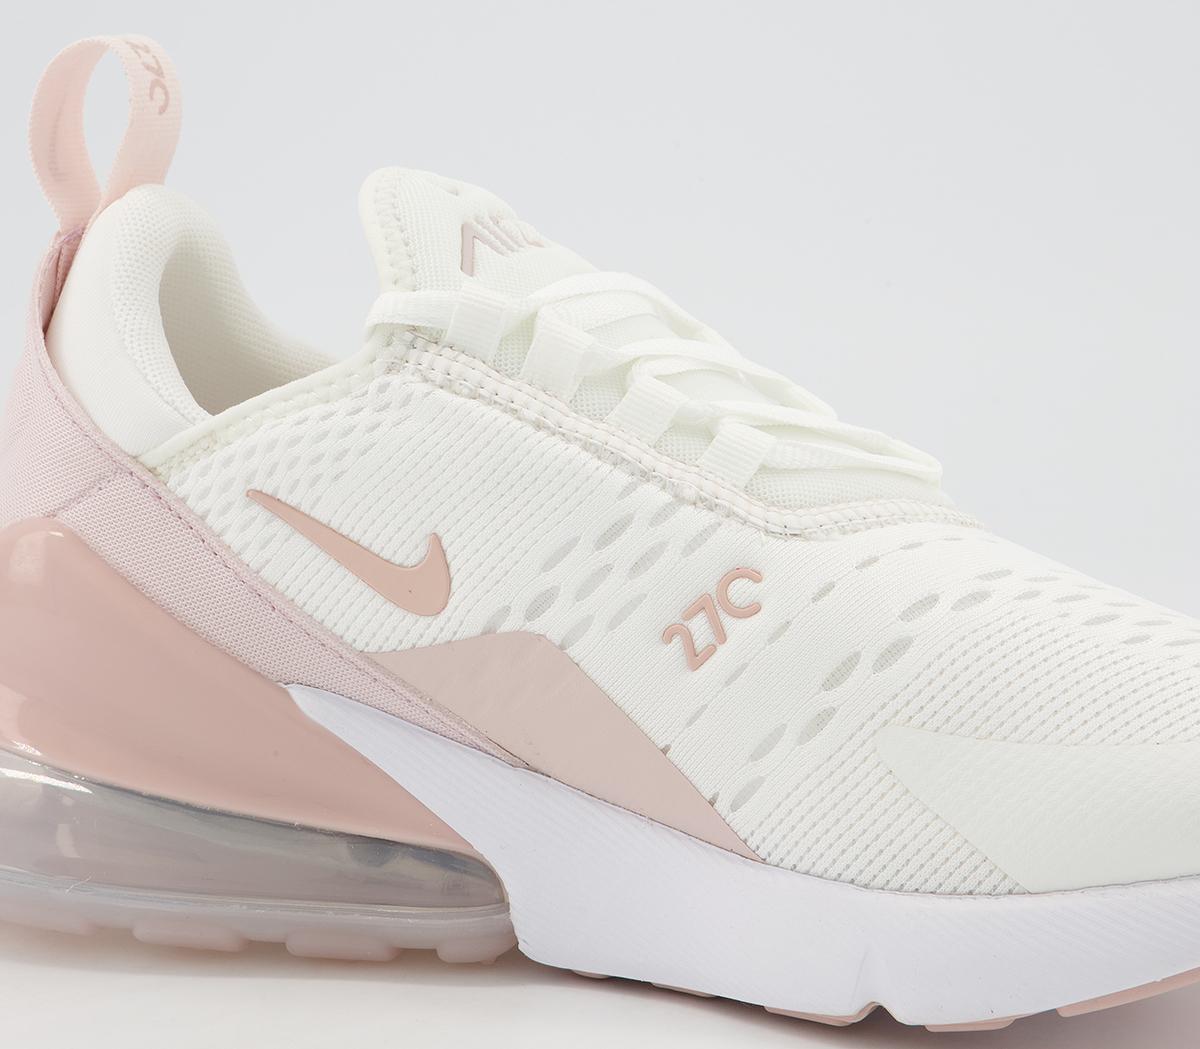 Nike Air Max 270 Trainers Summit White Pink Oxford Barely Rose - Hers trainers